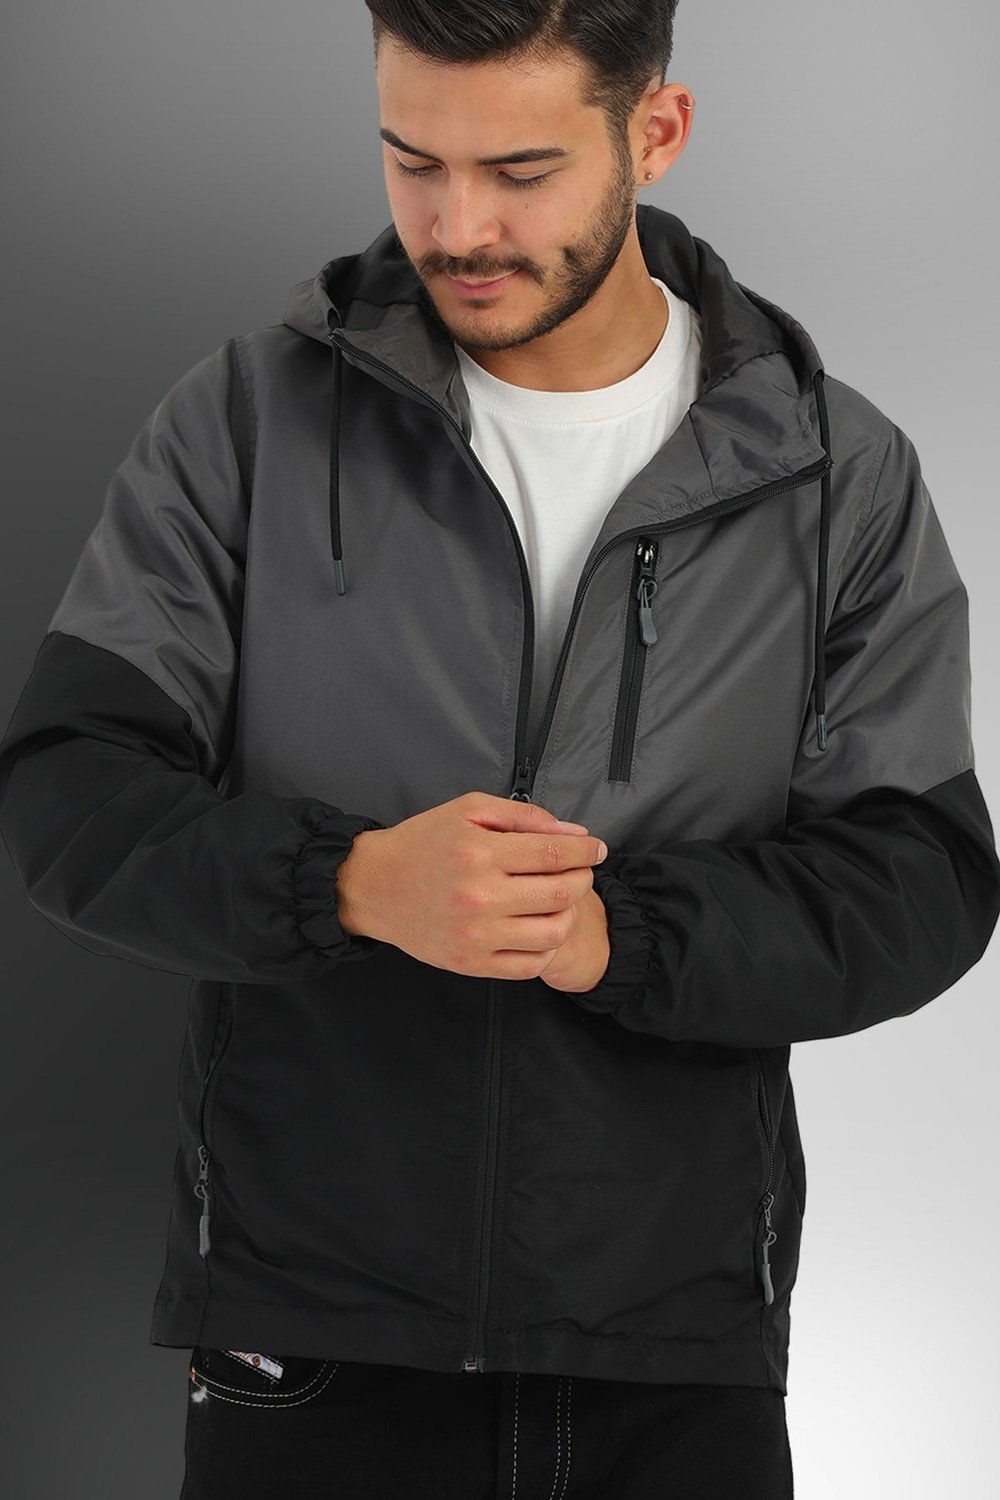 River Club Men's Anthracite-black Two Colors Inside Lined Water-Resistant Hooded Sports Raincoat-wind cap.